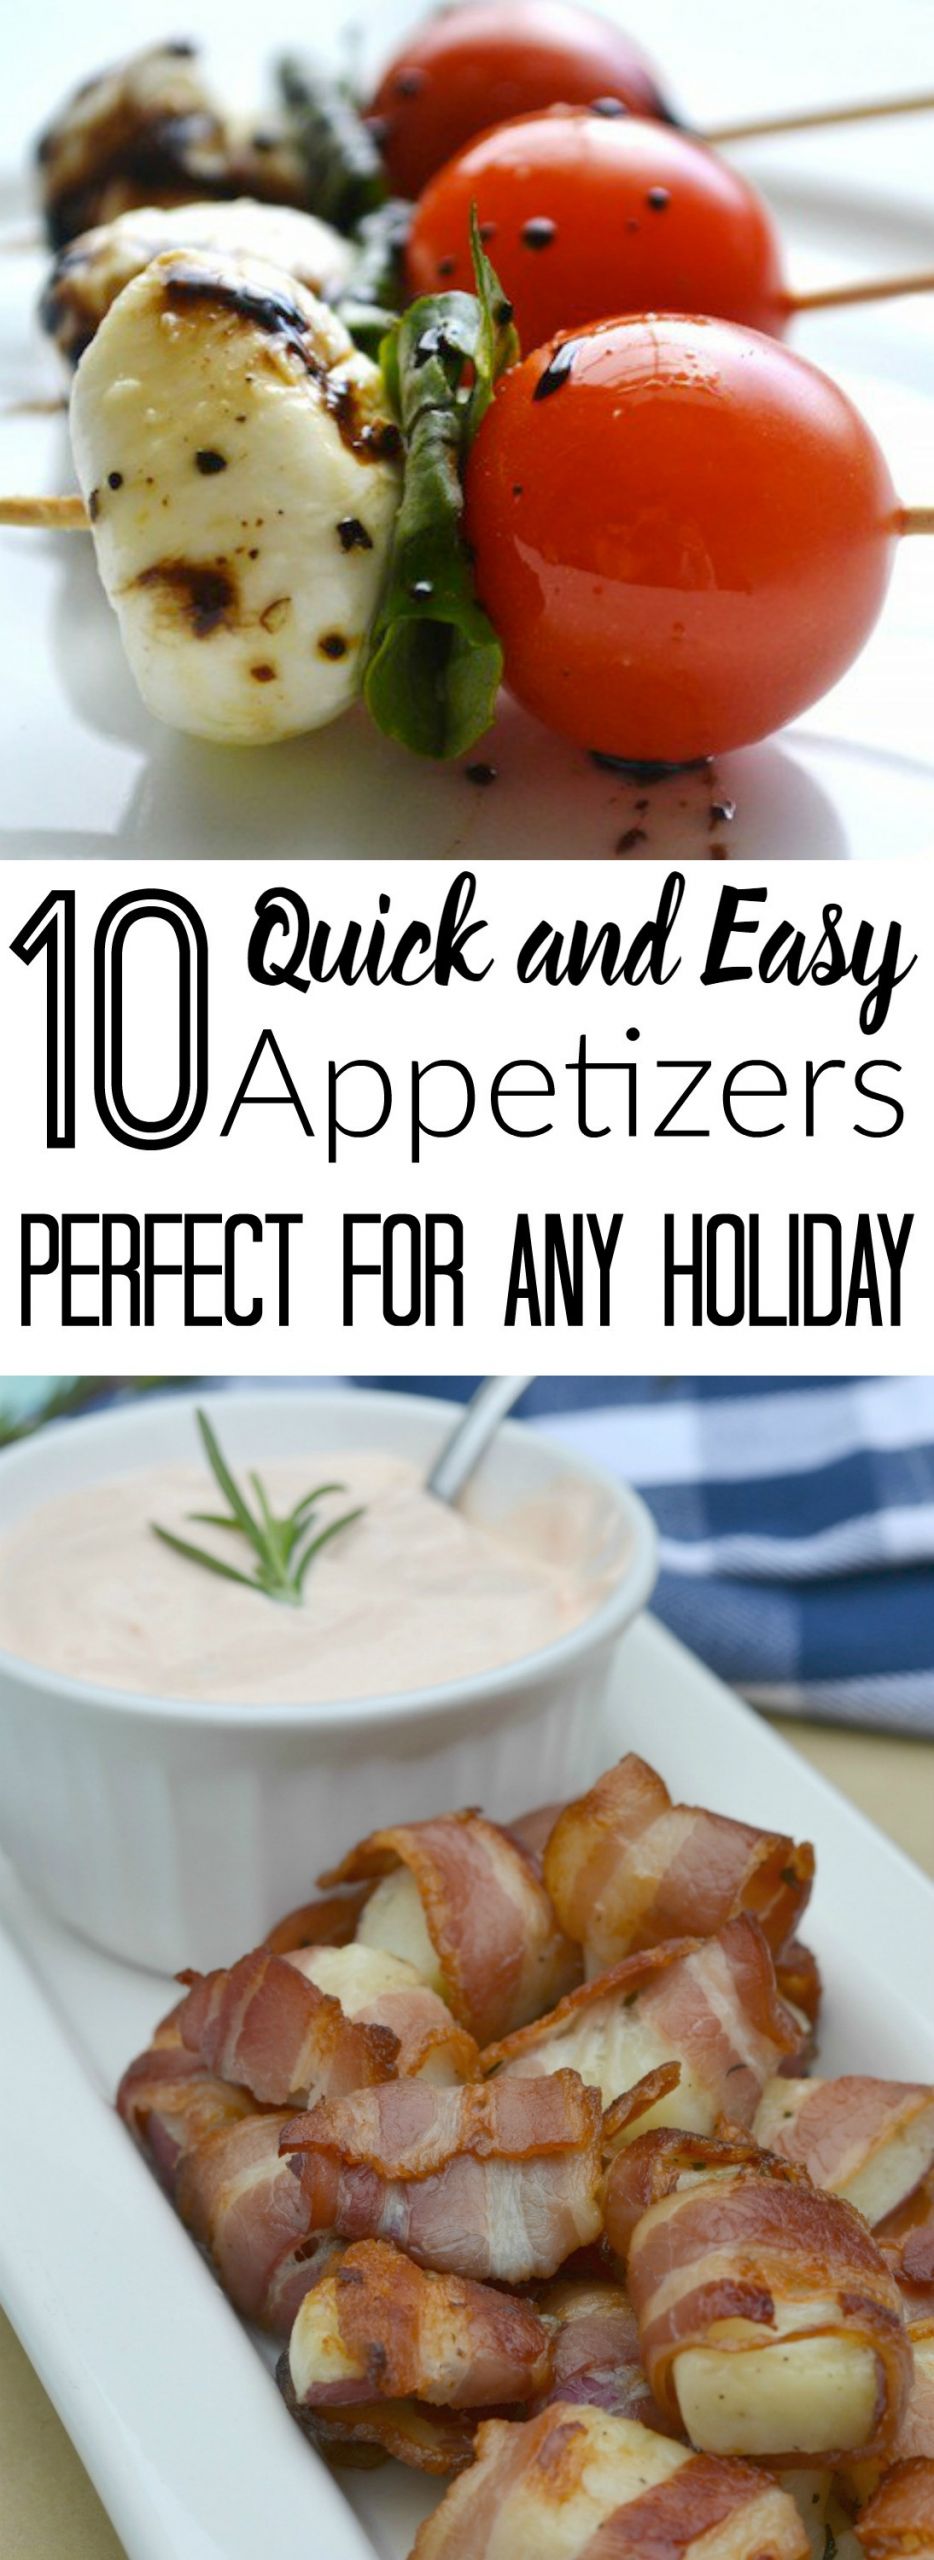 Quick And Easy Appetizers Recipe
 10 Quick and Easy Appetizers Perfect for any Holiday